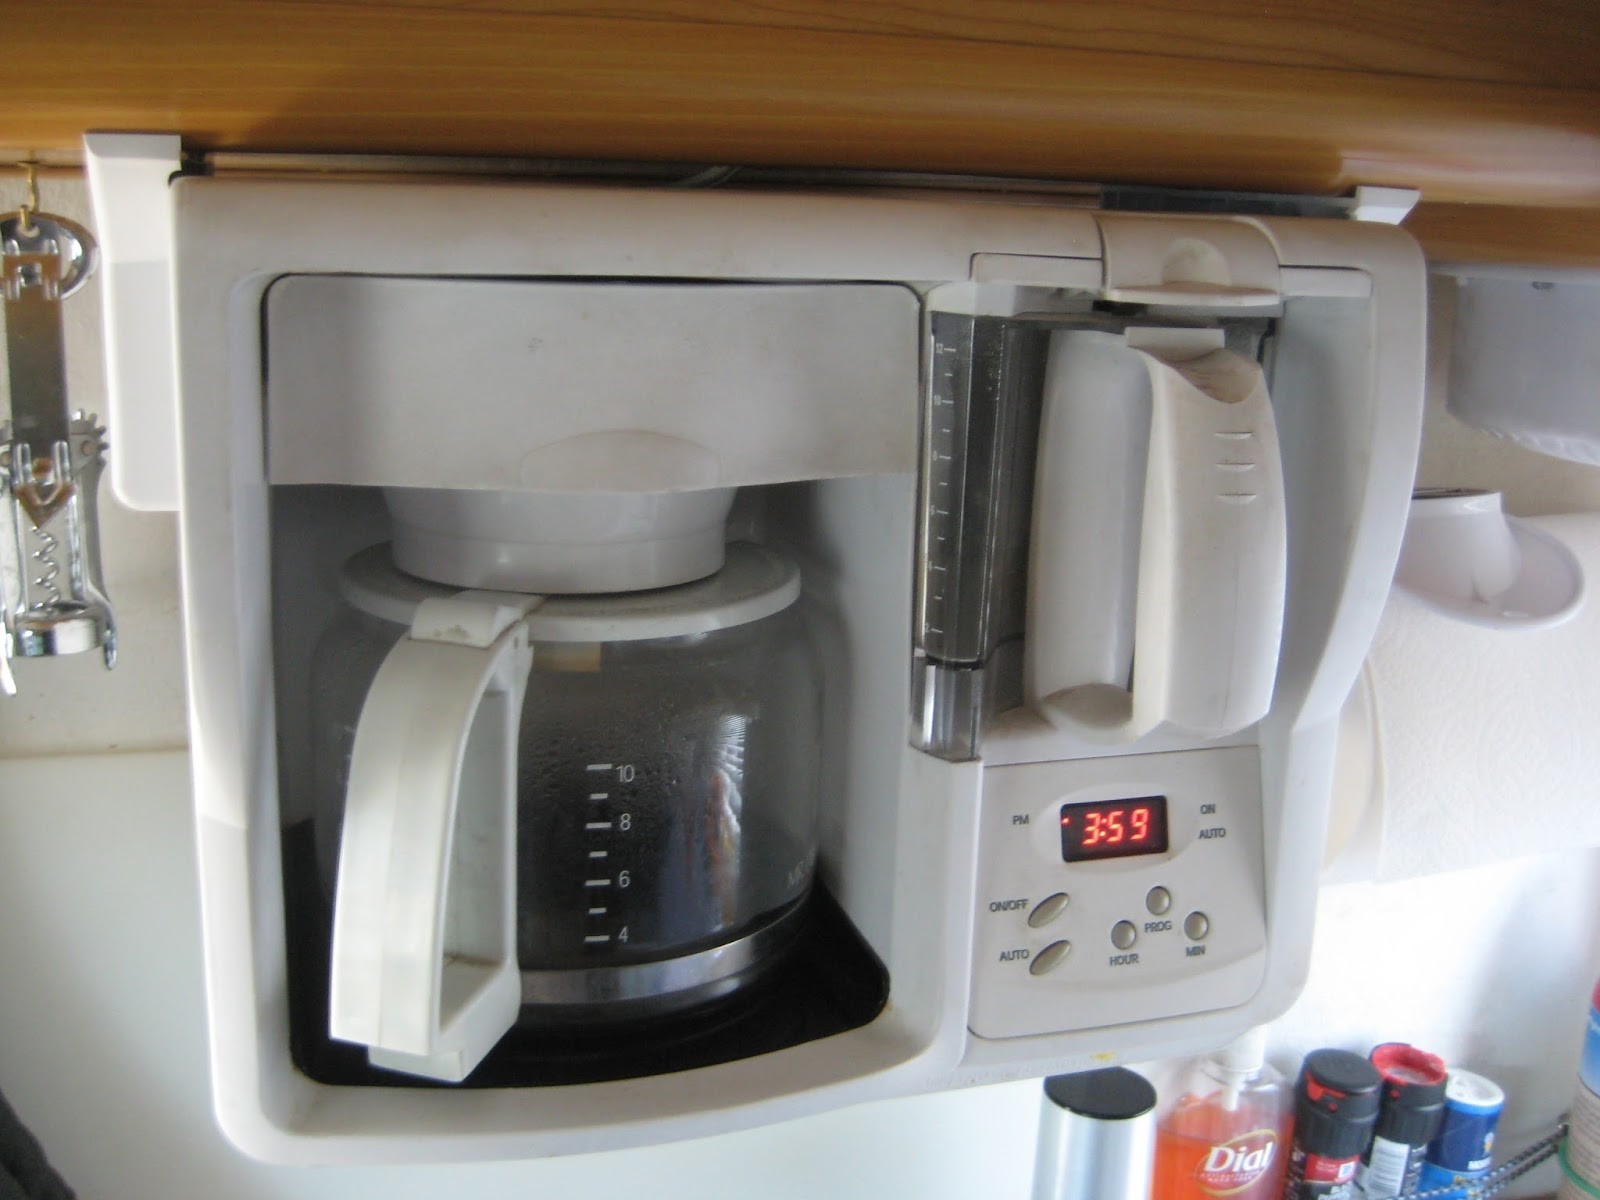 space saver coffee maker cyber monday